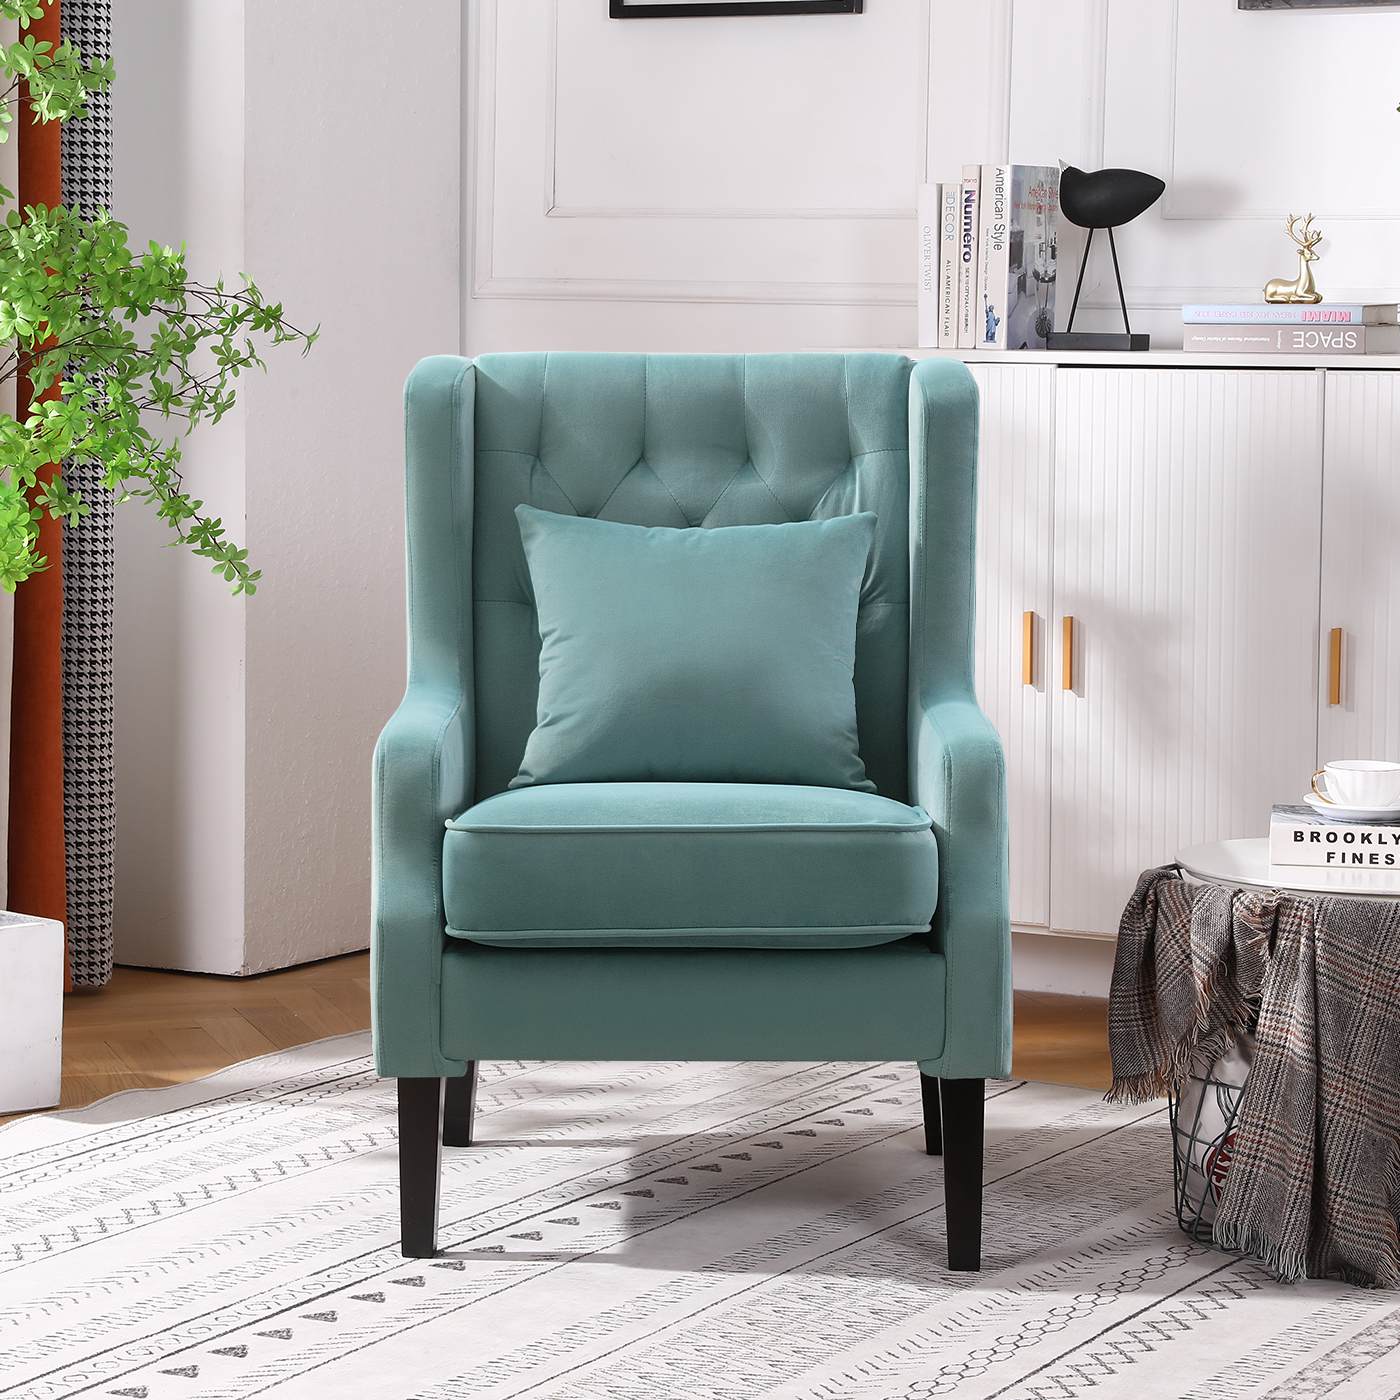 Vanbow.Modern chair with backrest, Bedroom, Living room, Reading chair(Seaweed Green)